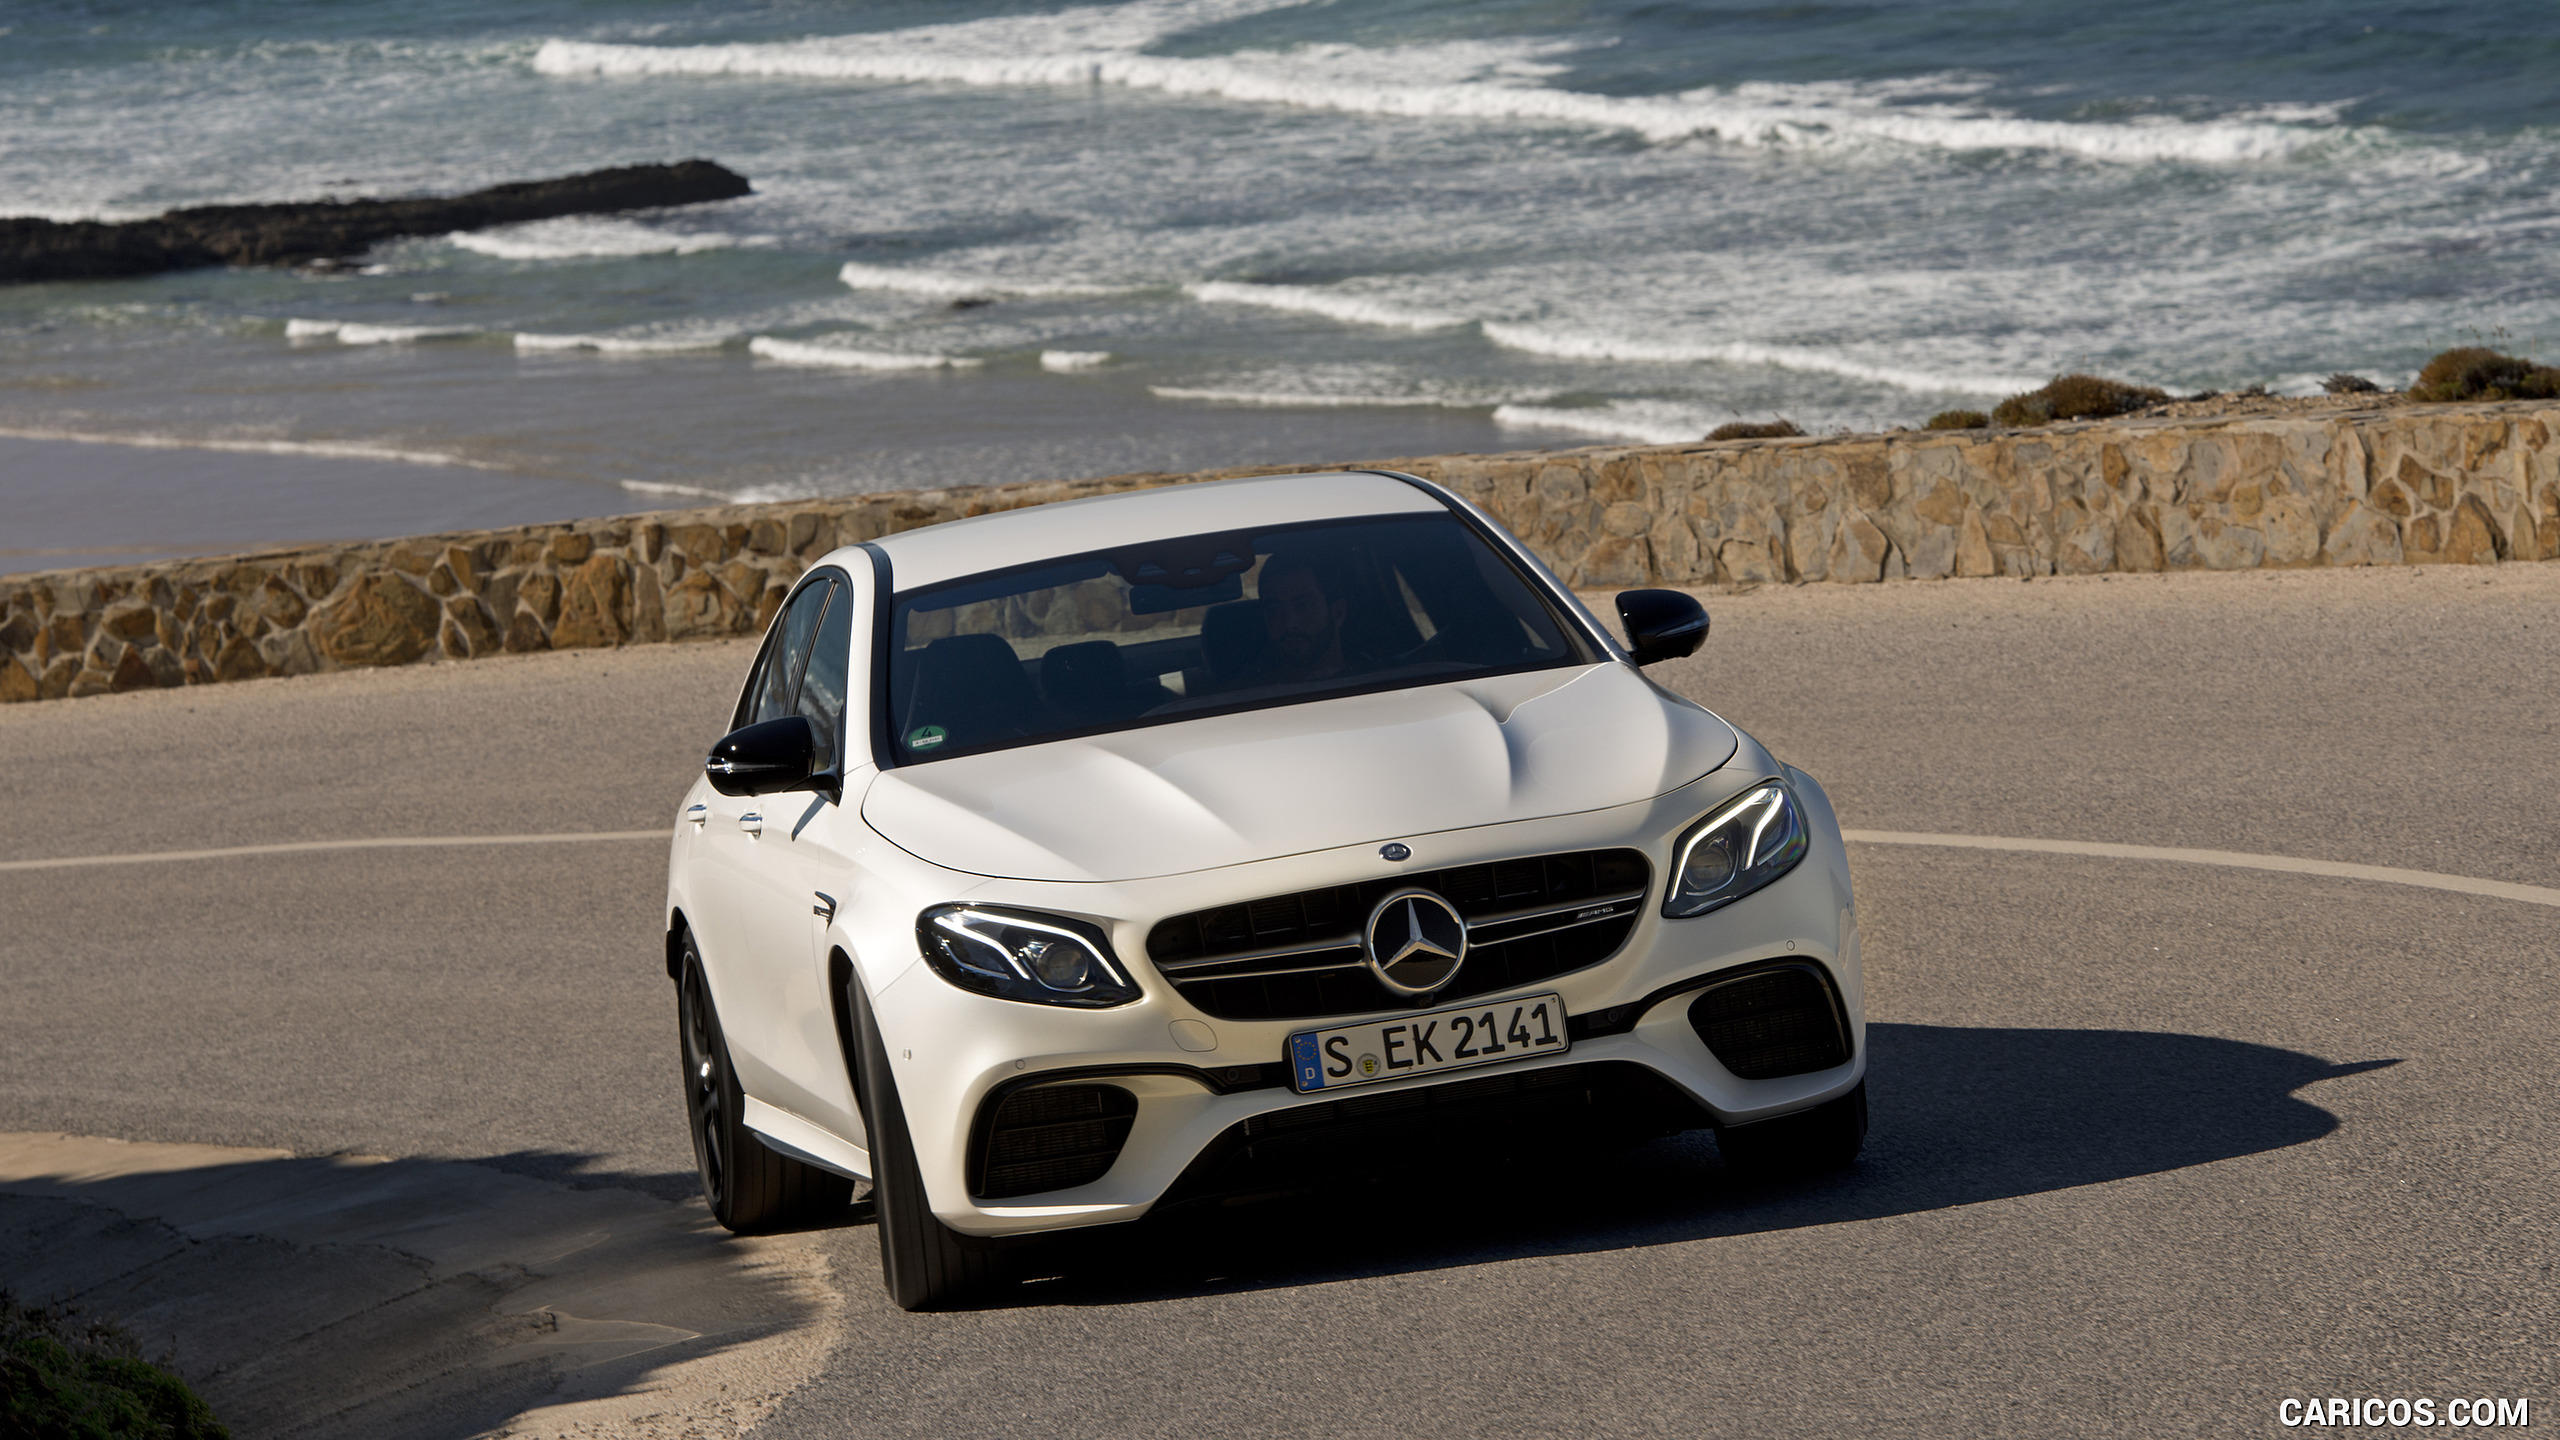 2018 Mercedes-AMG E63 S 4MATIC+ - Front, #53 of 323